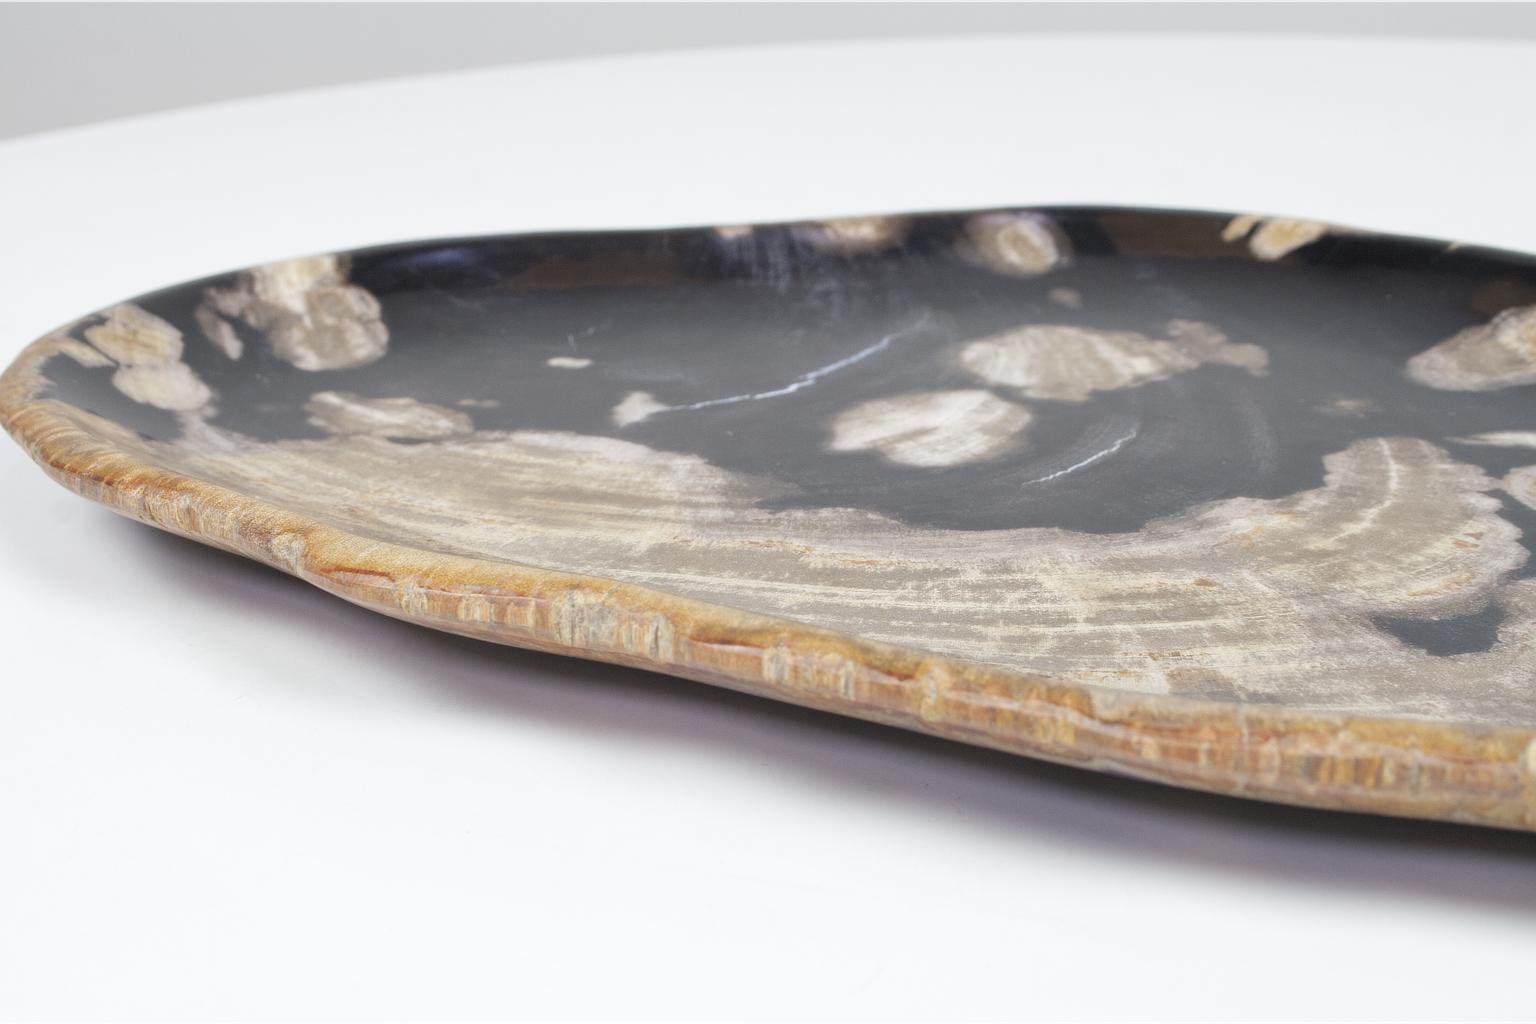 18th Century and Earlier Black and Beige Oval Shaped Petrified Wooden Platter or Plate Organic Origin